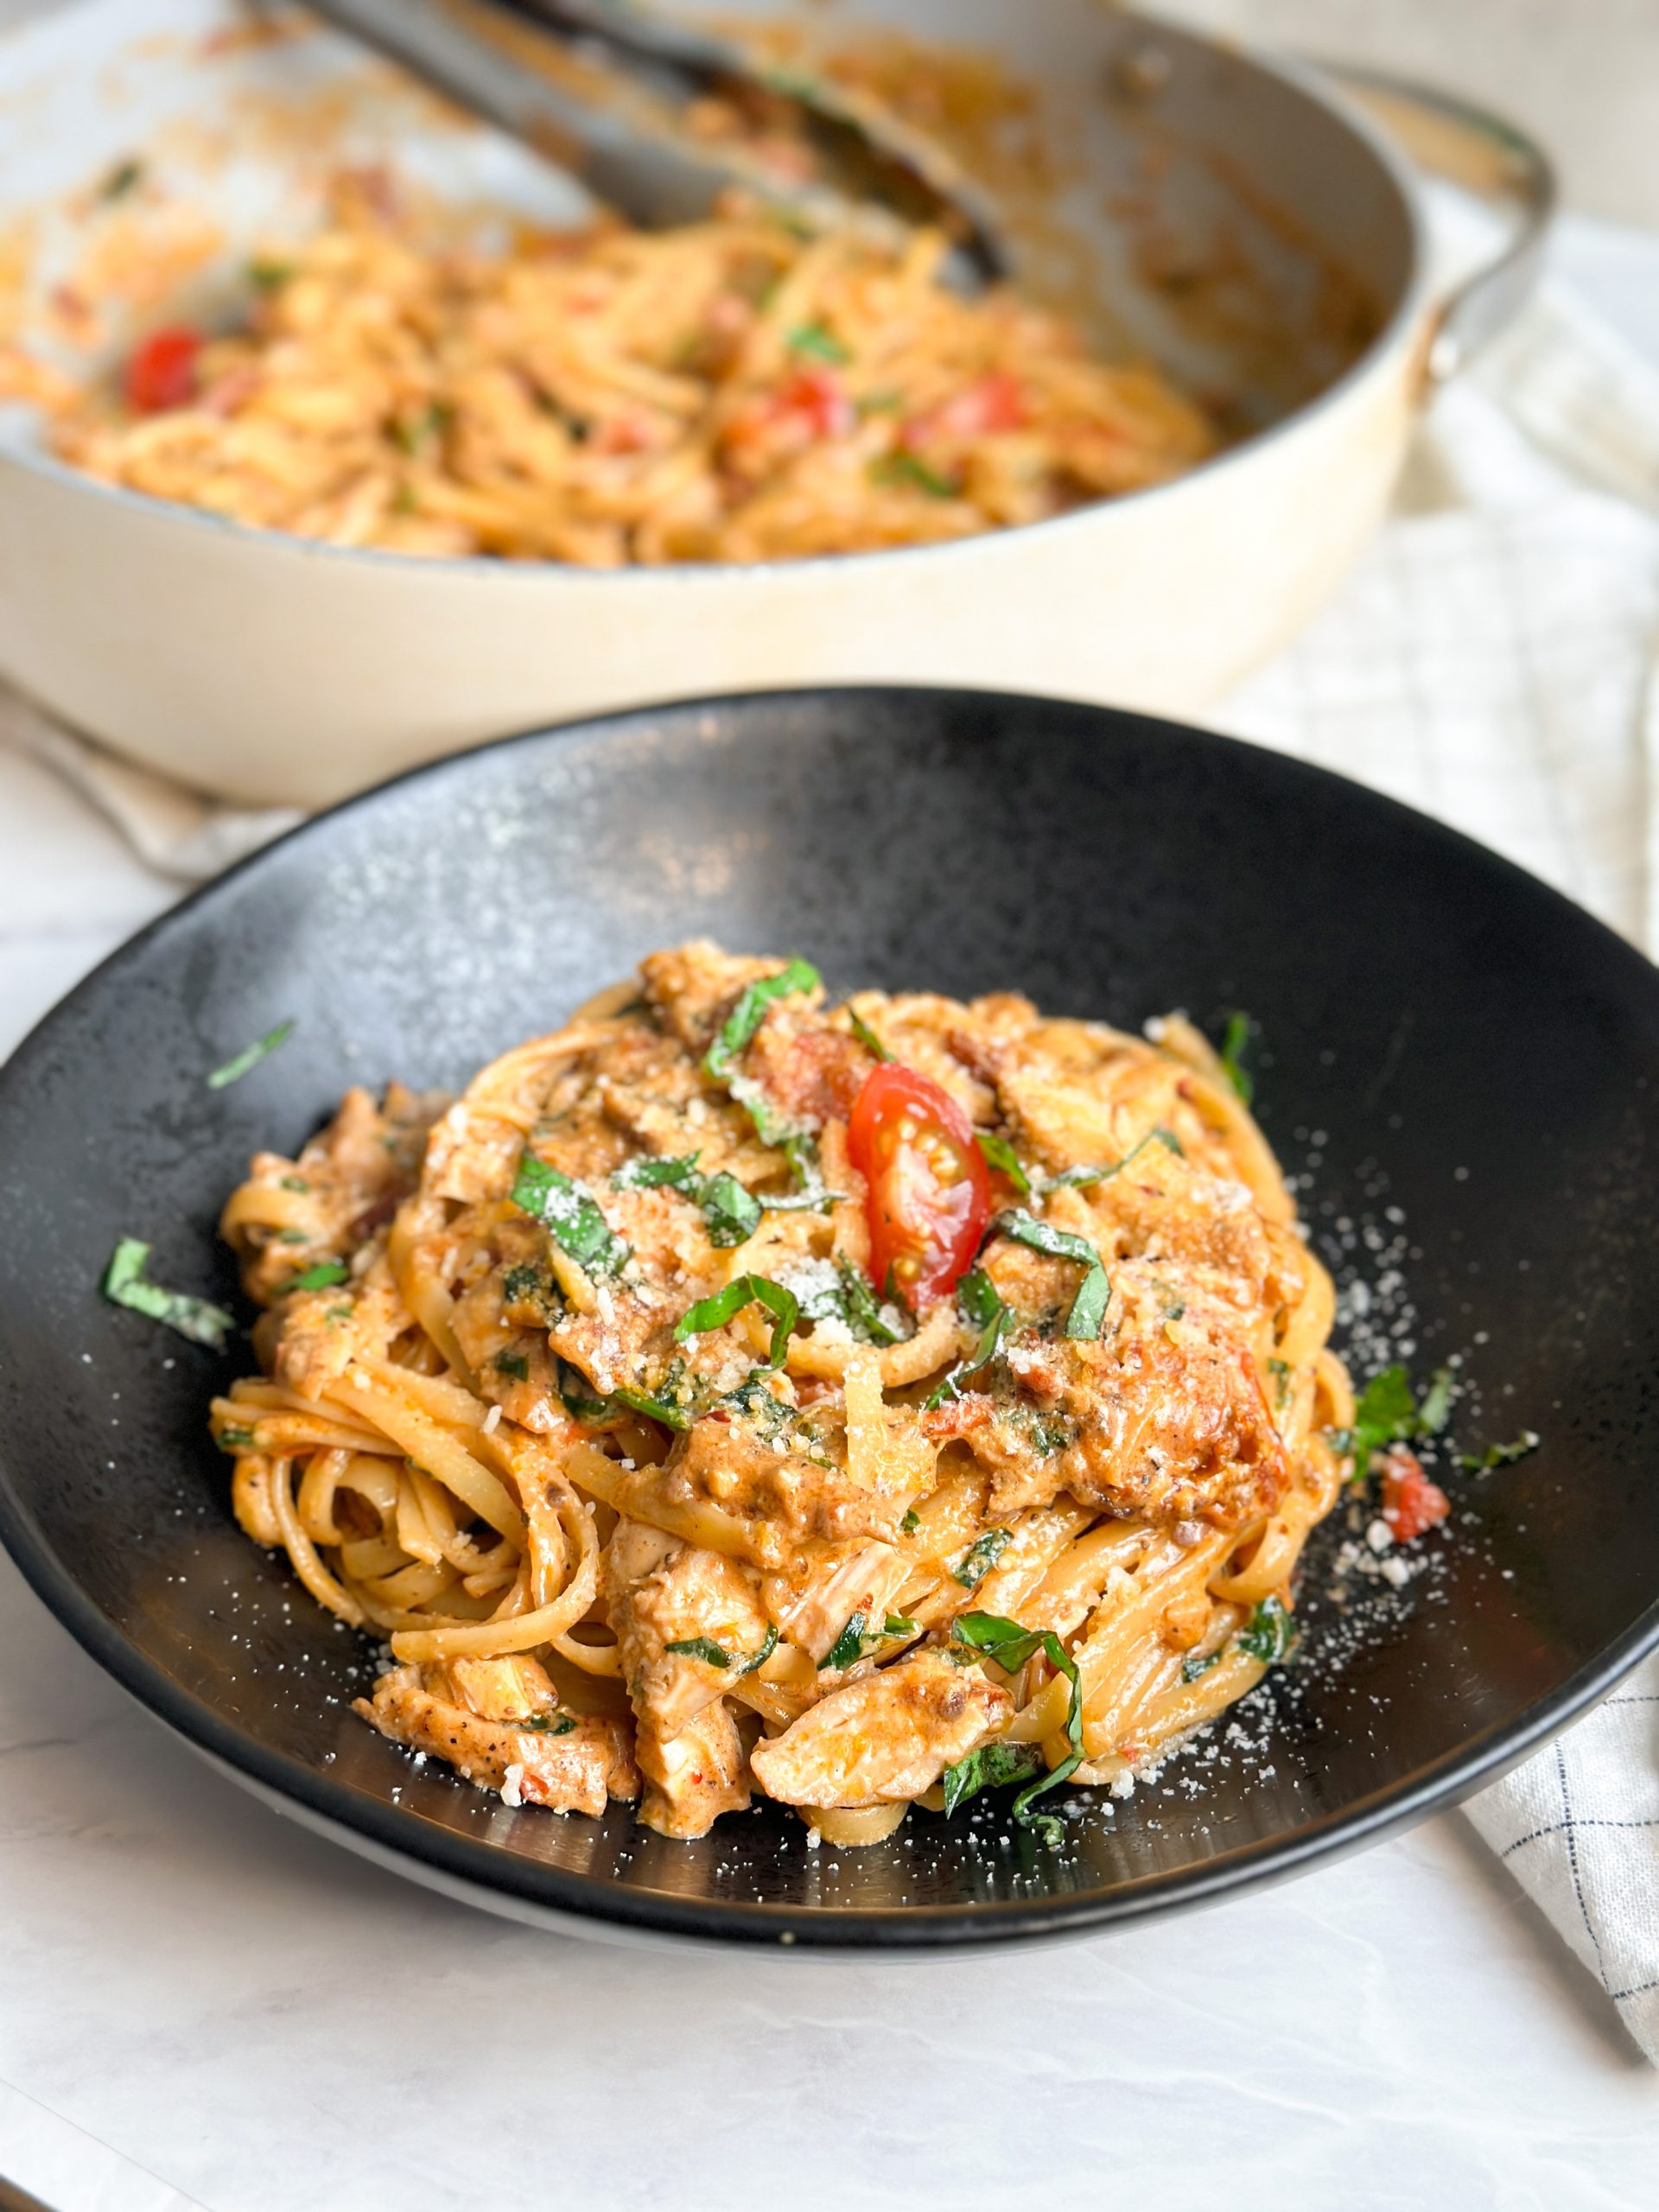 creamy tuscan chicken pasta in a black plate garnished with basil leaves